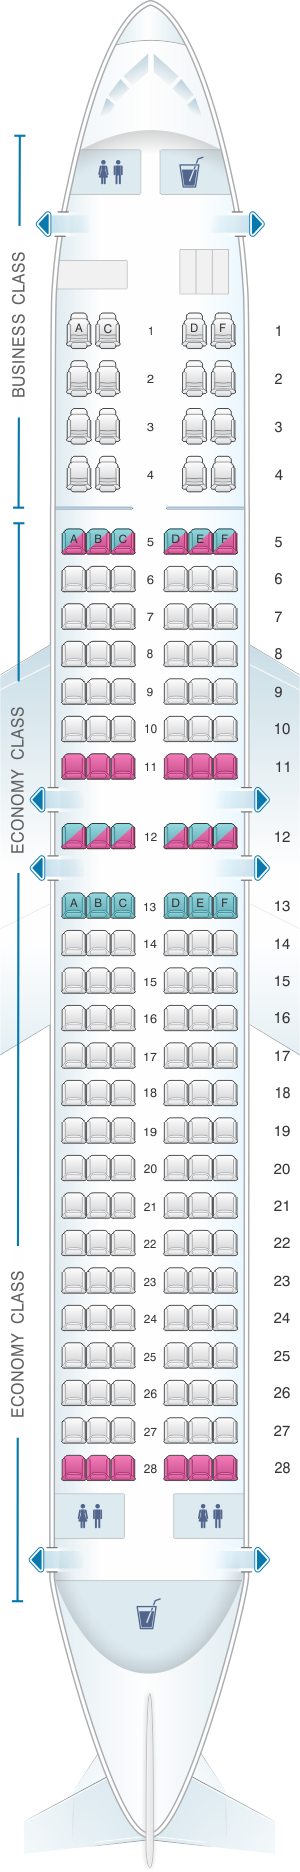 Seat map for Egyptair Boeing B737 800